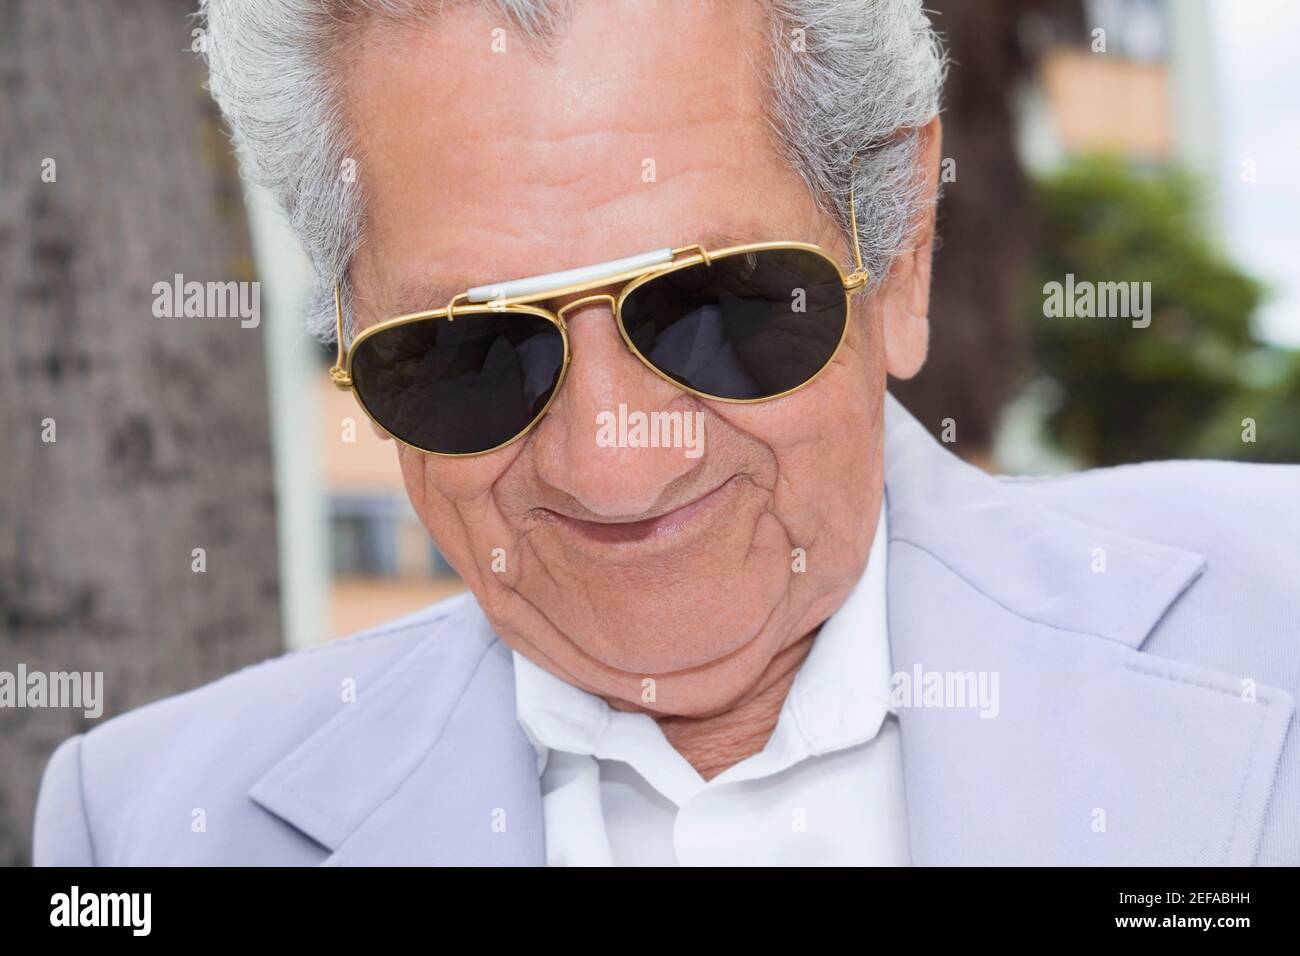 Close-up of a senior man wearing sunglasses and smiling Stock Photo